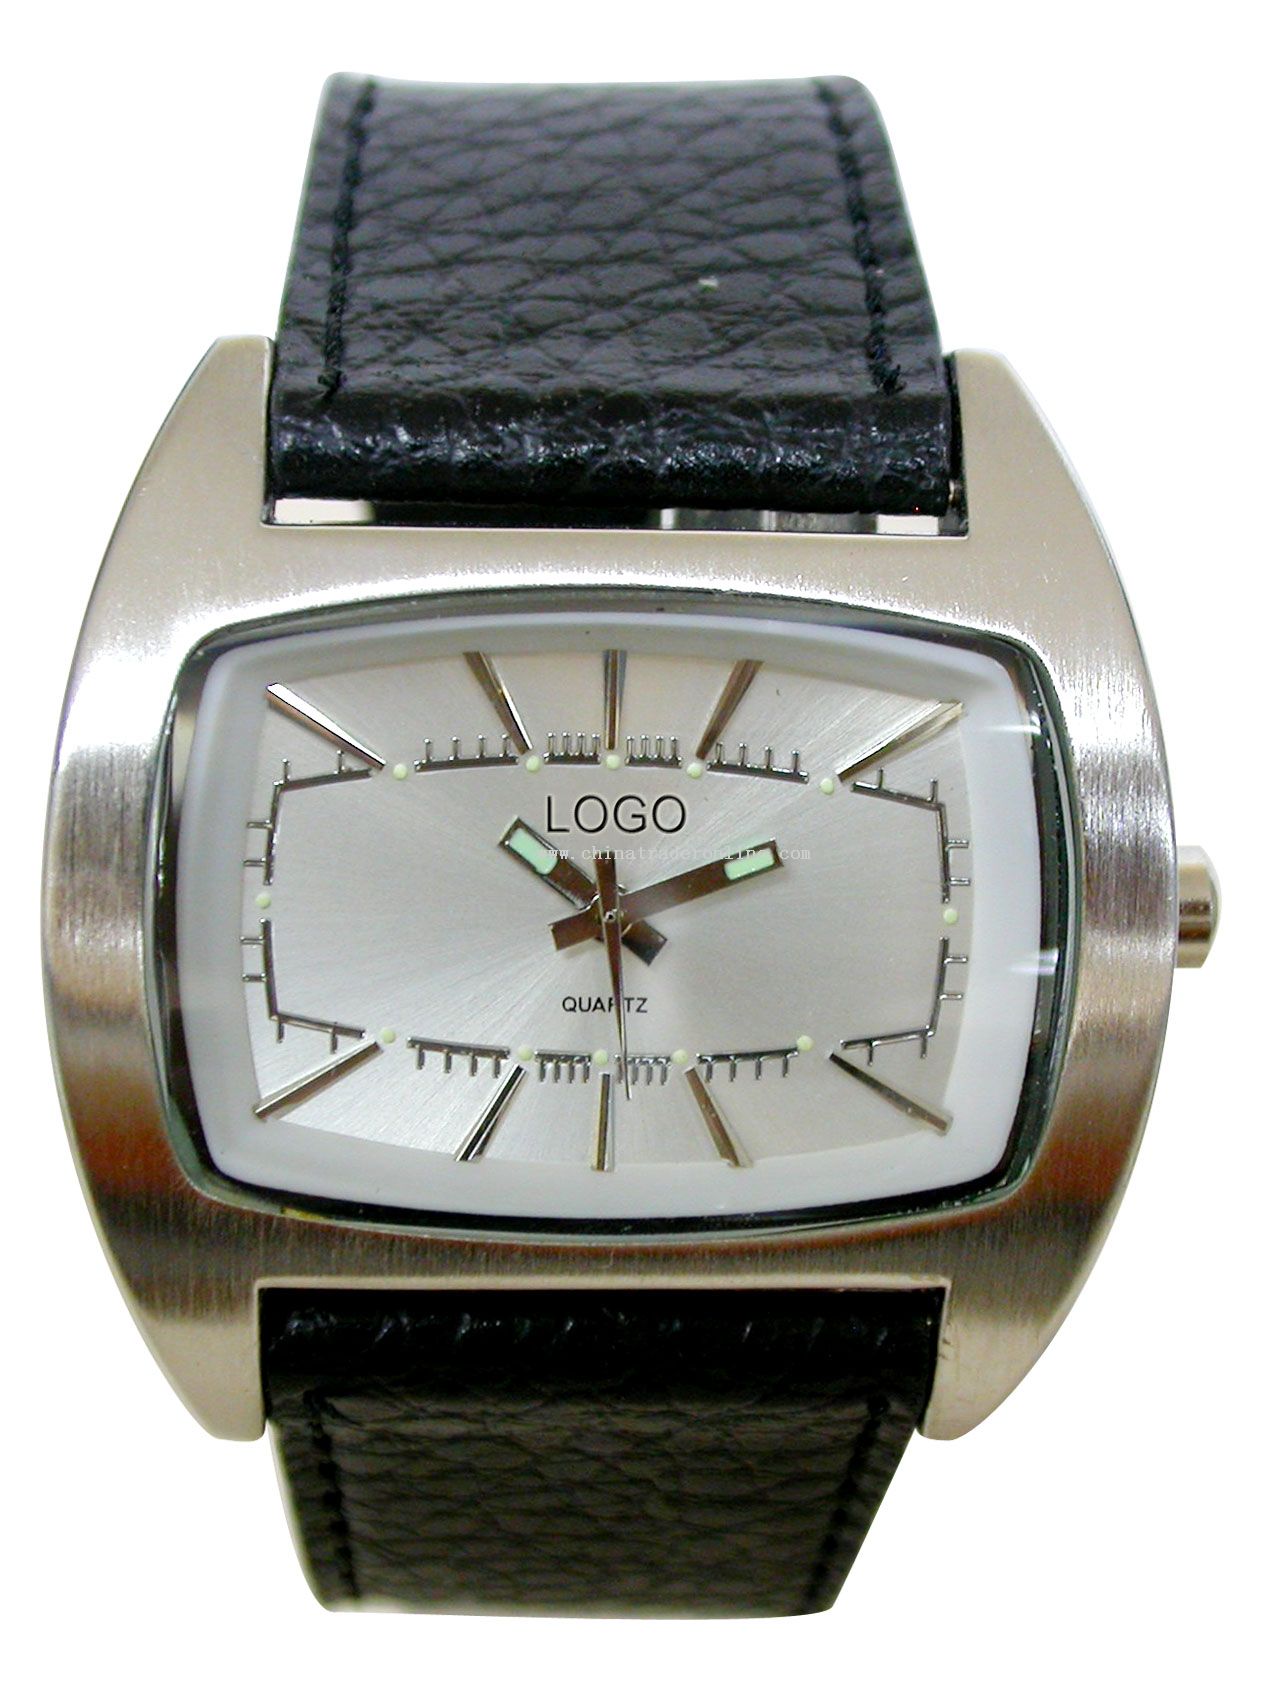 Gentle men watch from China